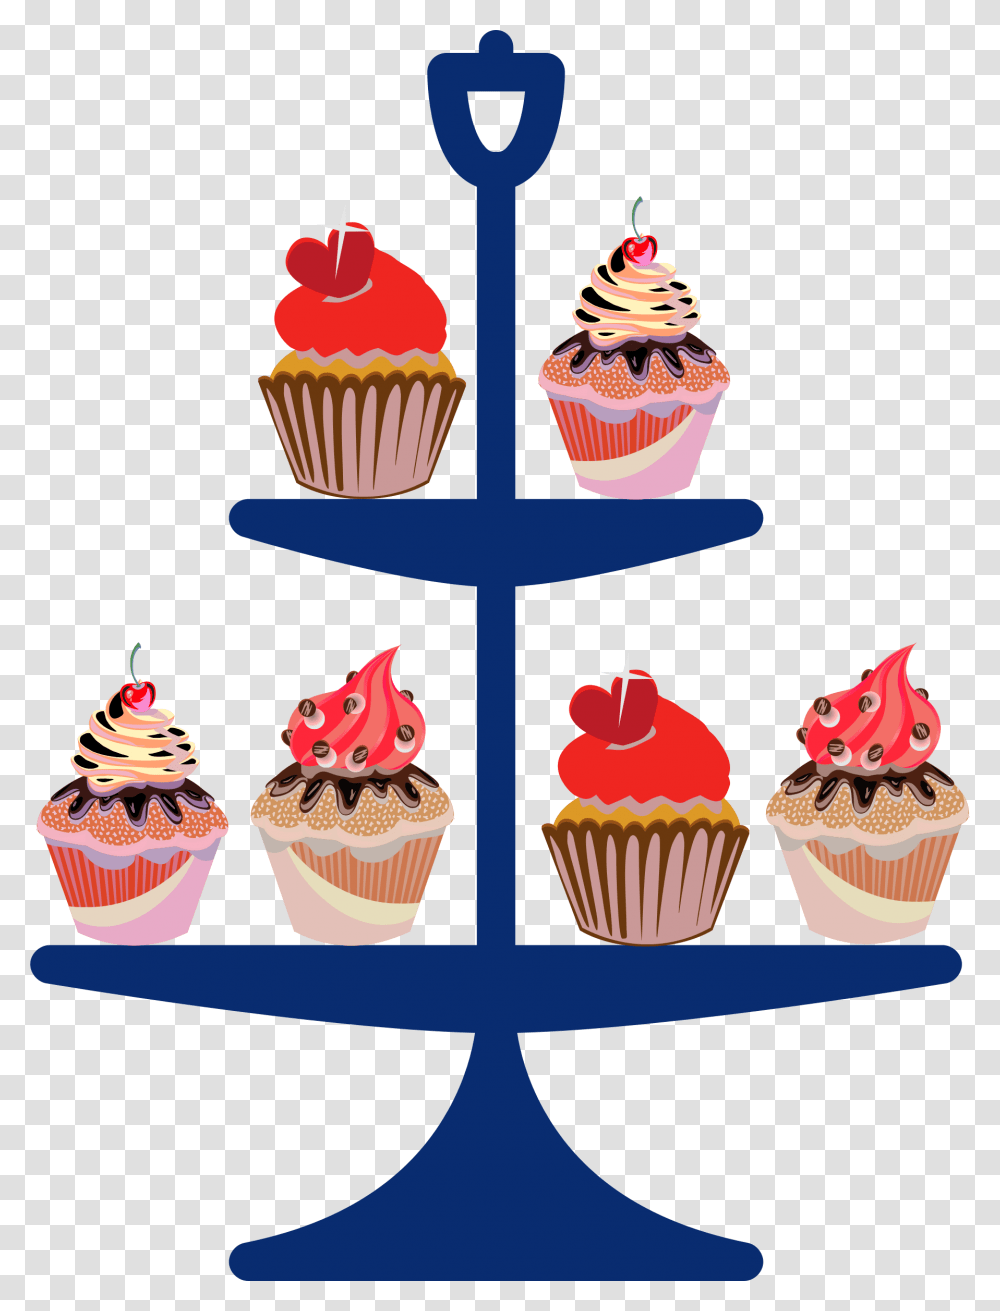 Cakes On A Stand Clip Arts Cupcake Bakery Clip Art, Cream, Dessert, Food, Creme Transparent Png